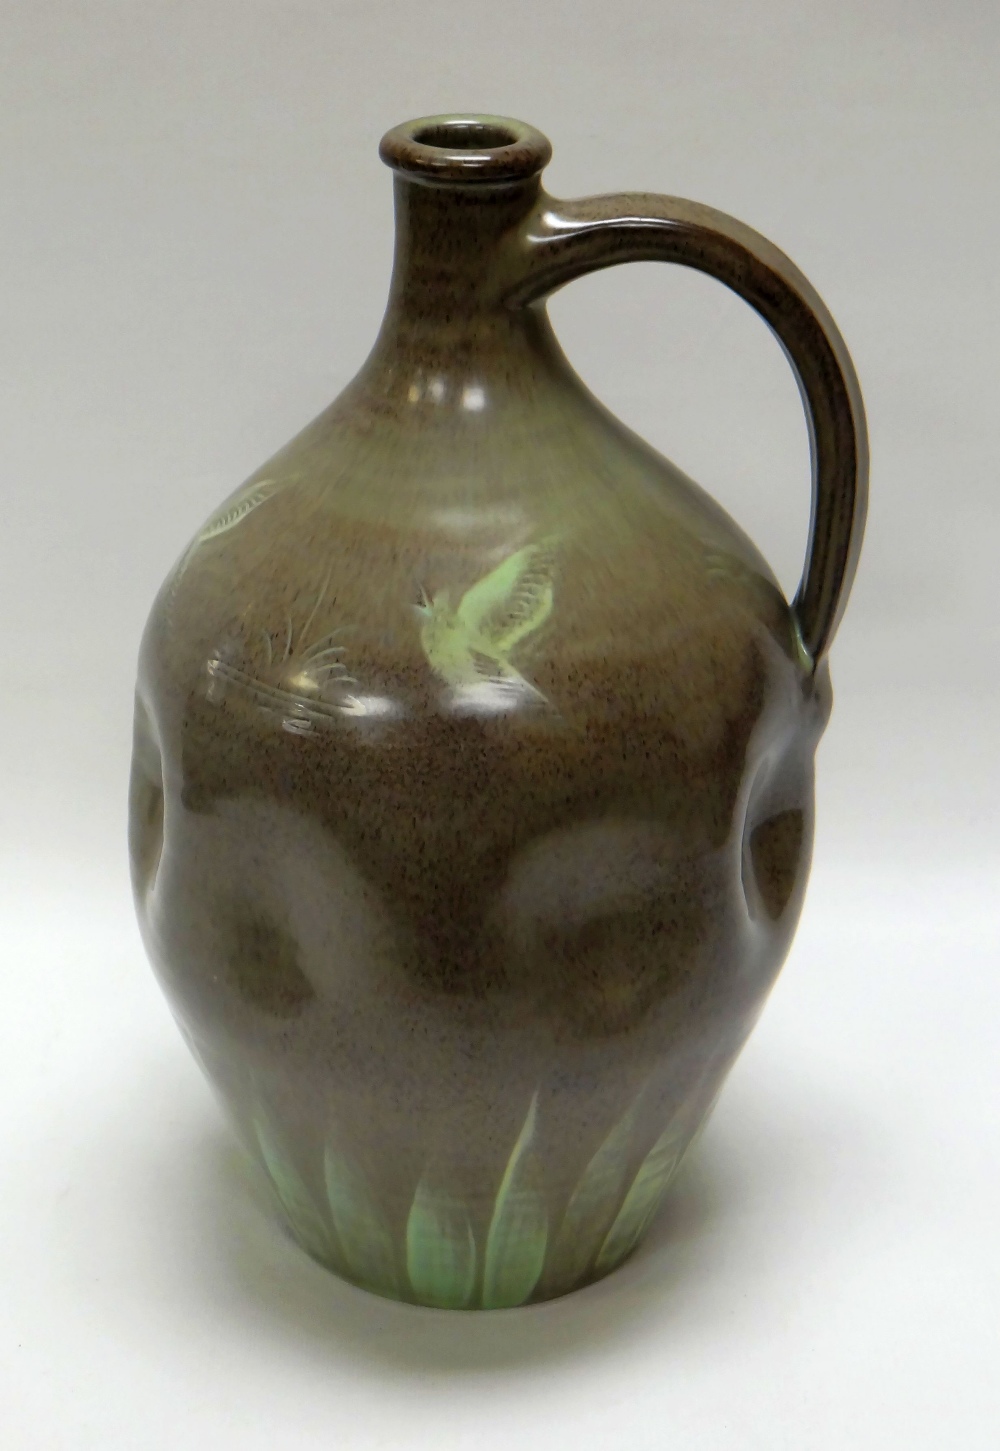 A WILLIAM FISHLEY HOLLAND STUDIO POTTERY FLASK with dimpled body, loop handle and in mottled grey